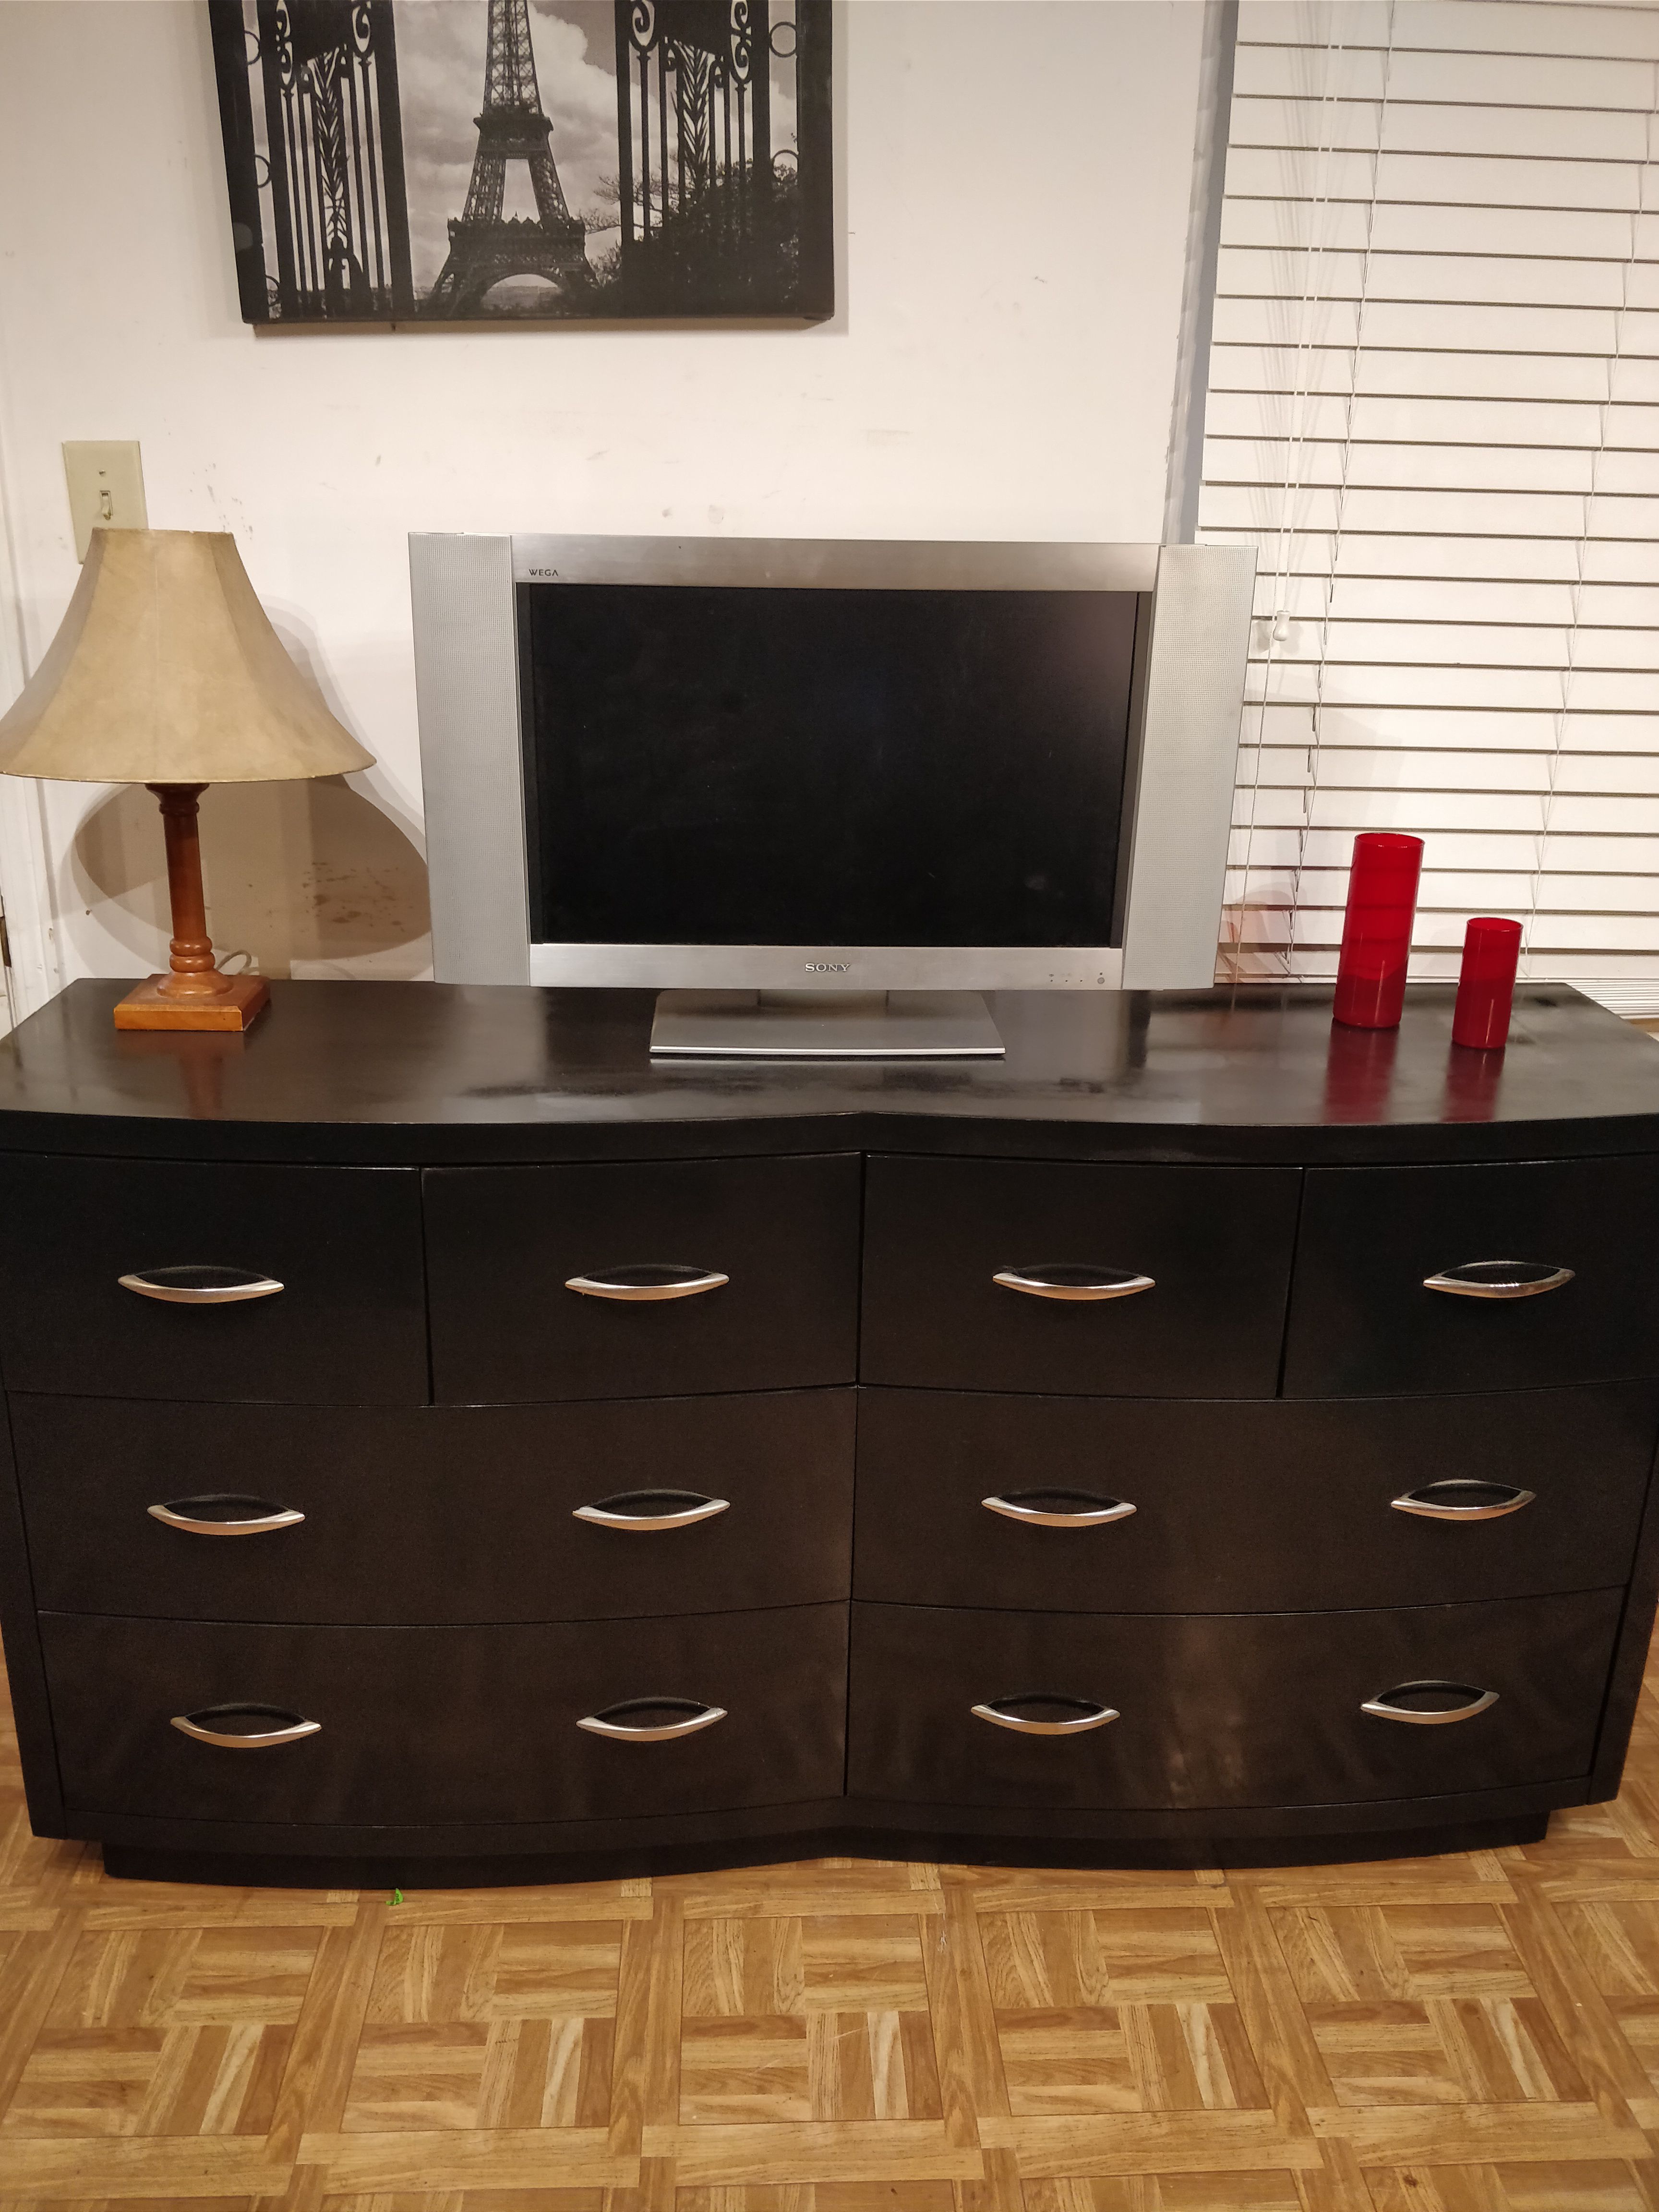 Like new modern solid wood bug dresser/TV stand/buffet with 8 drawers in very good condition, all drawers sliding smooth